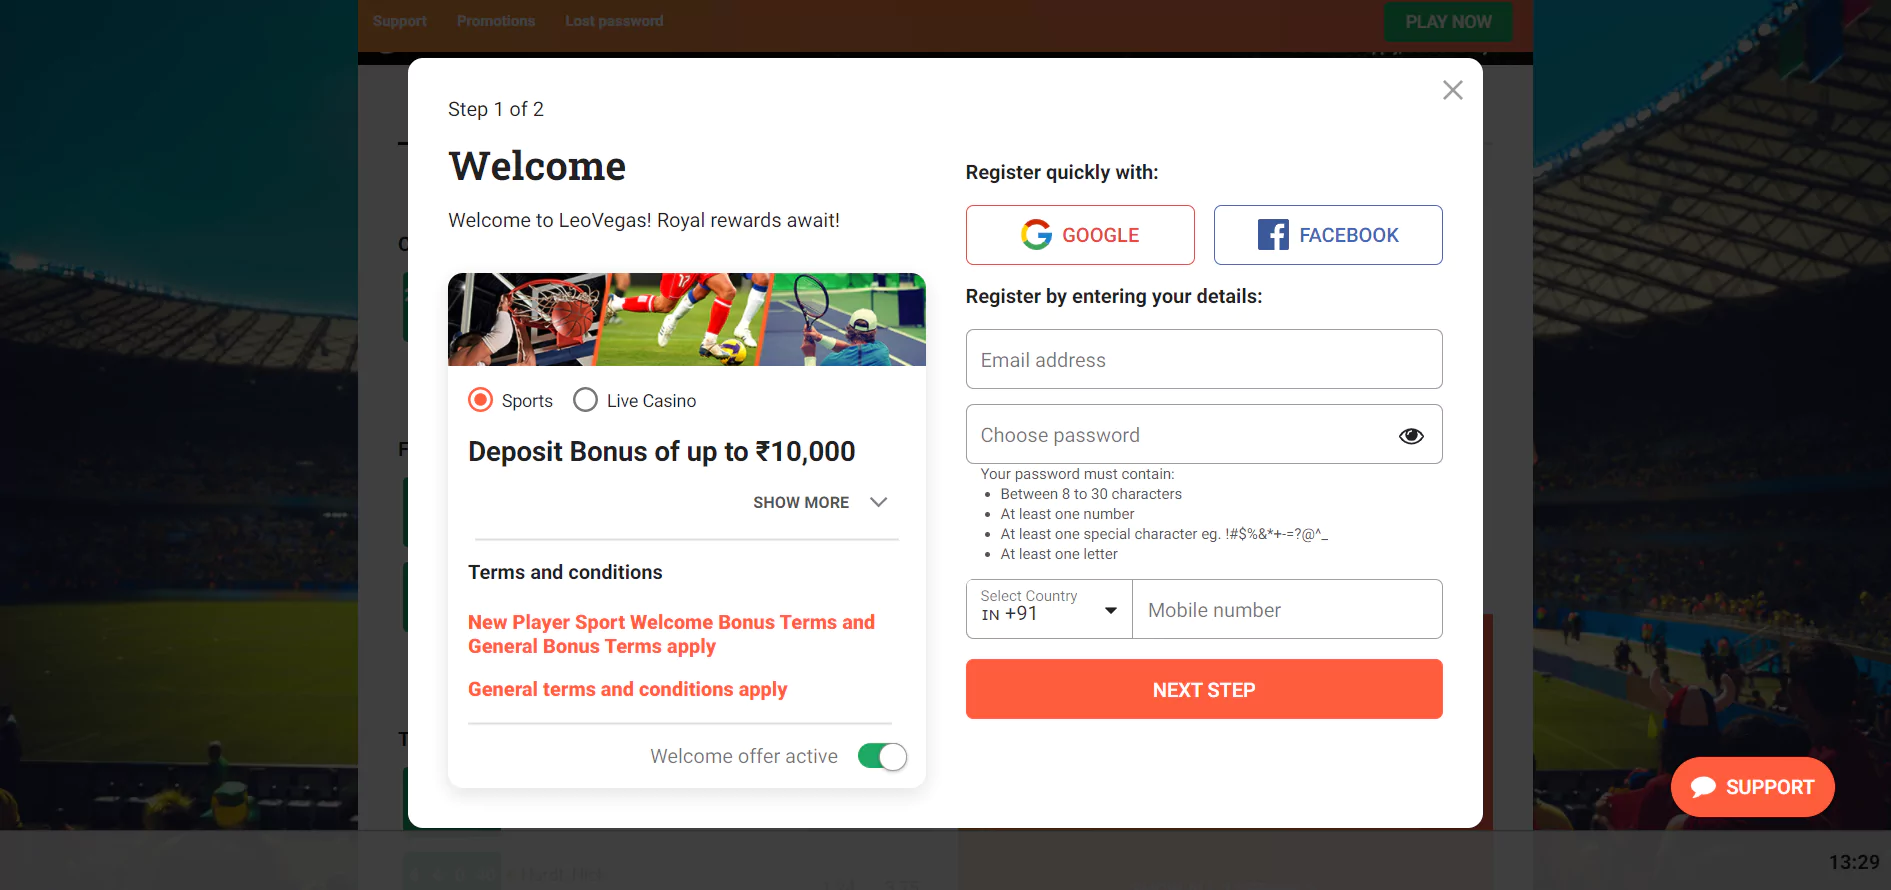 Leovegas Online Casino Welcome Bonuses and Sports Betting Page